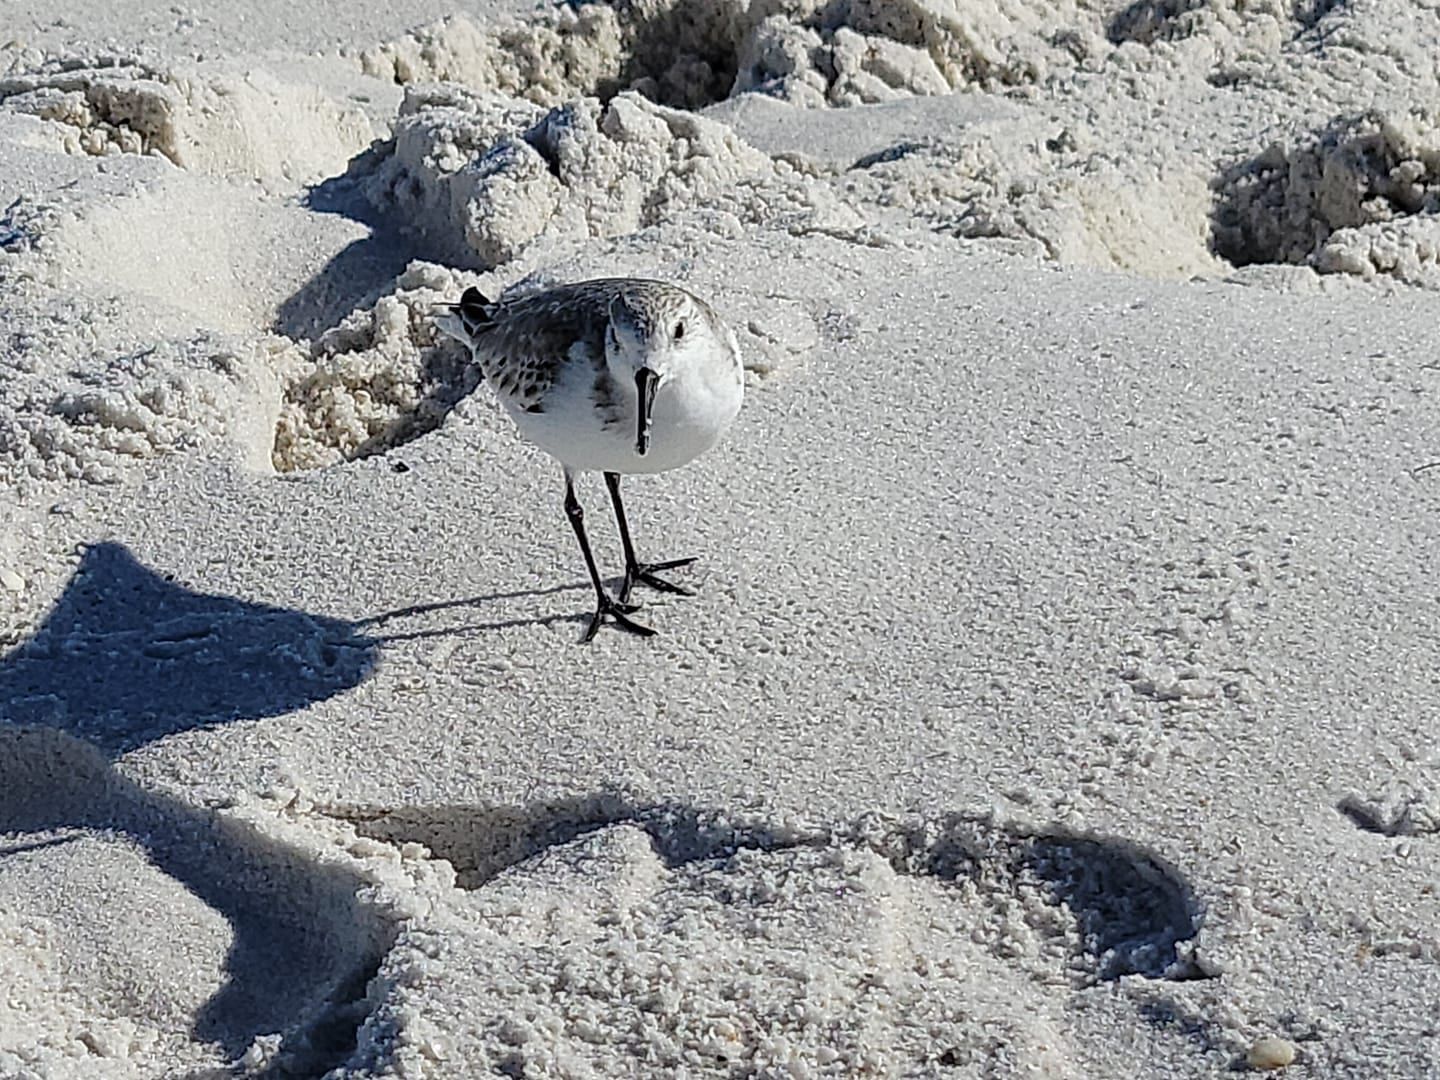 Navarre Beach has a plethora of birds to watch while you're out soaking up the sun. What's your favorite beach bird?
Today's Photo of the Day was submitted by Matthew Blalock.